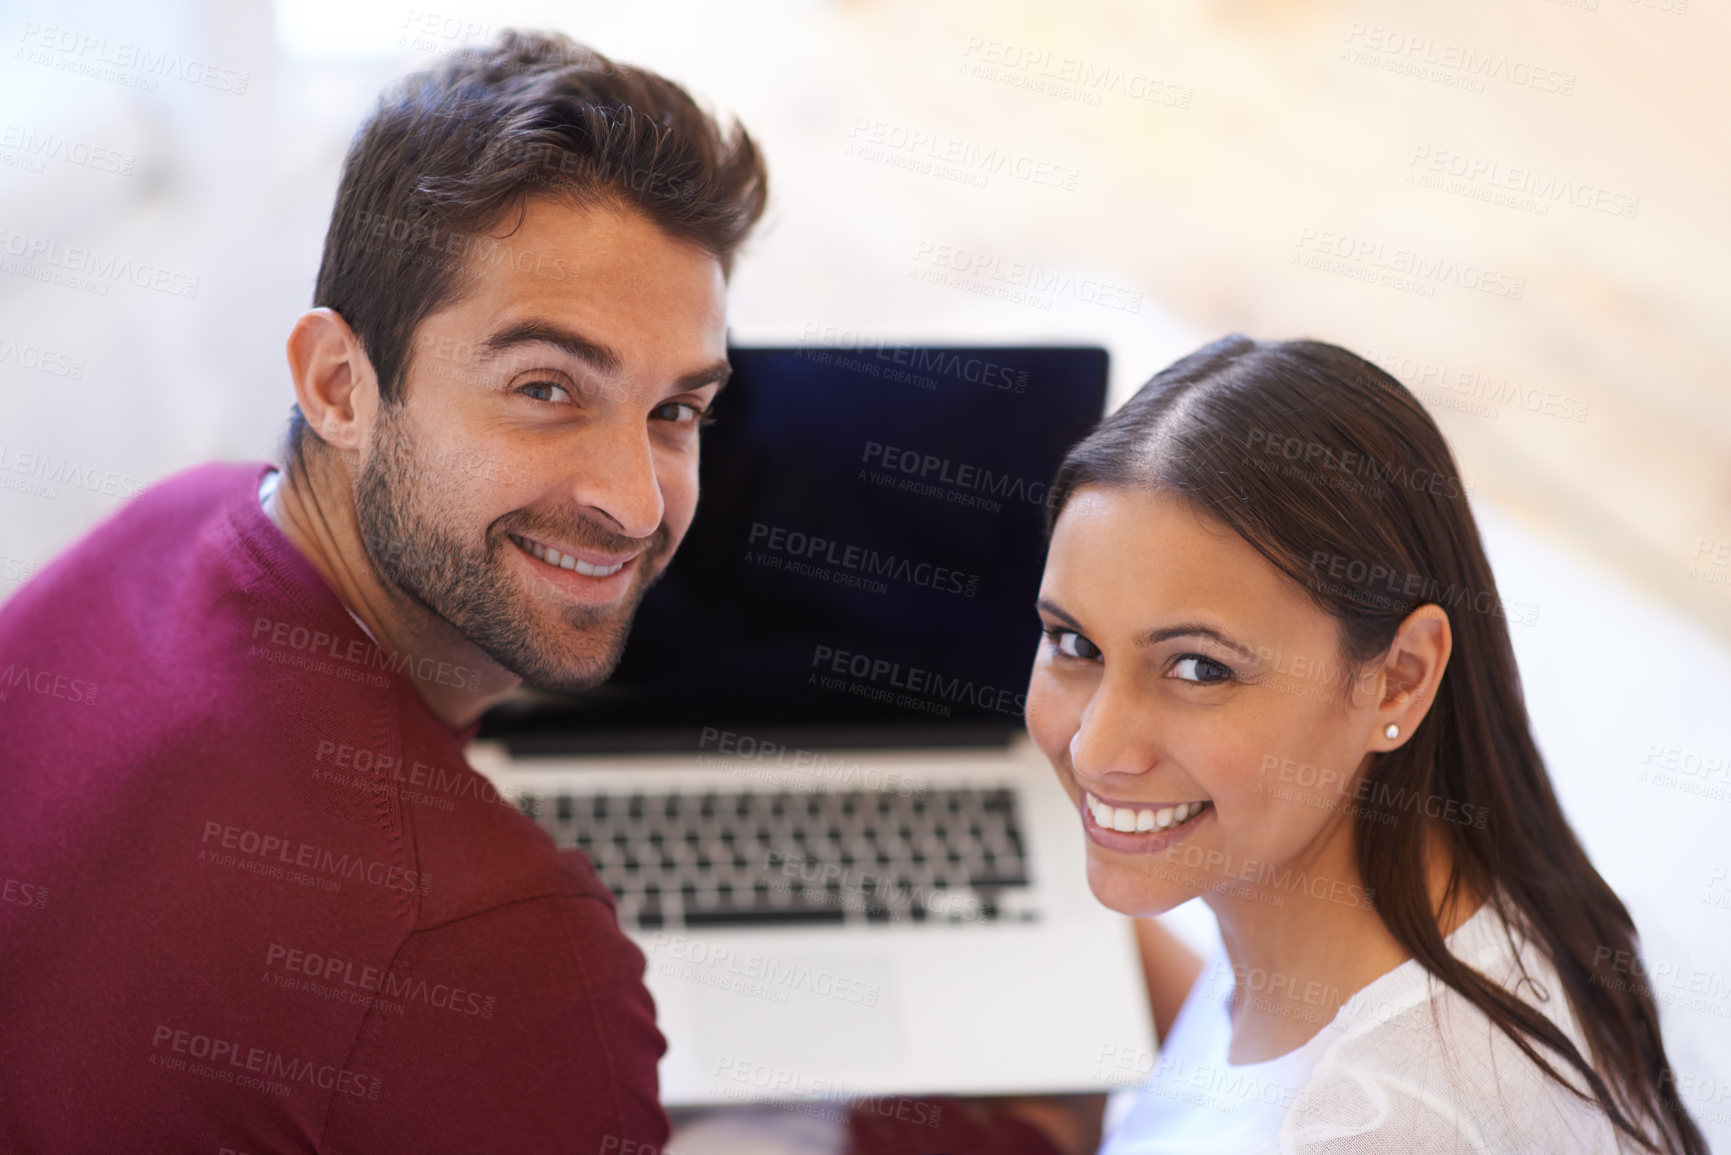 Buy stock photo A happy young couple using their laptop together at home